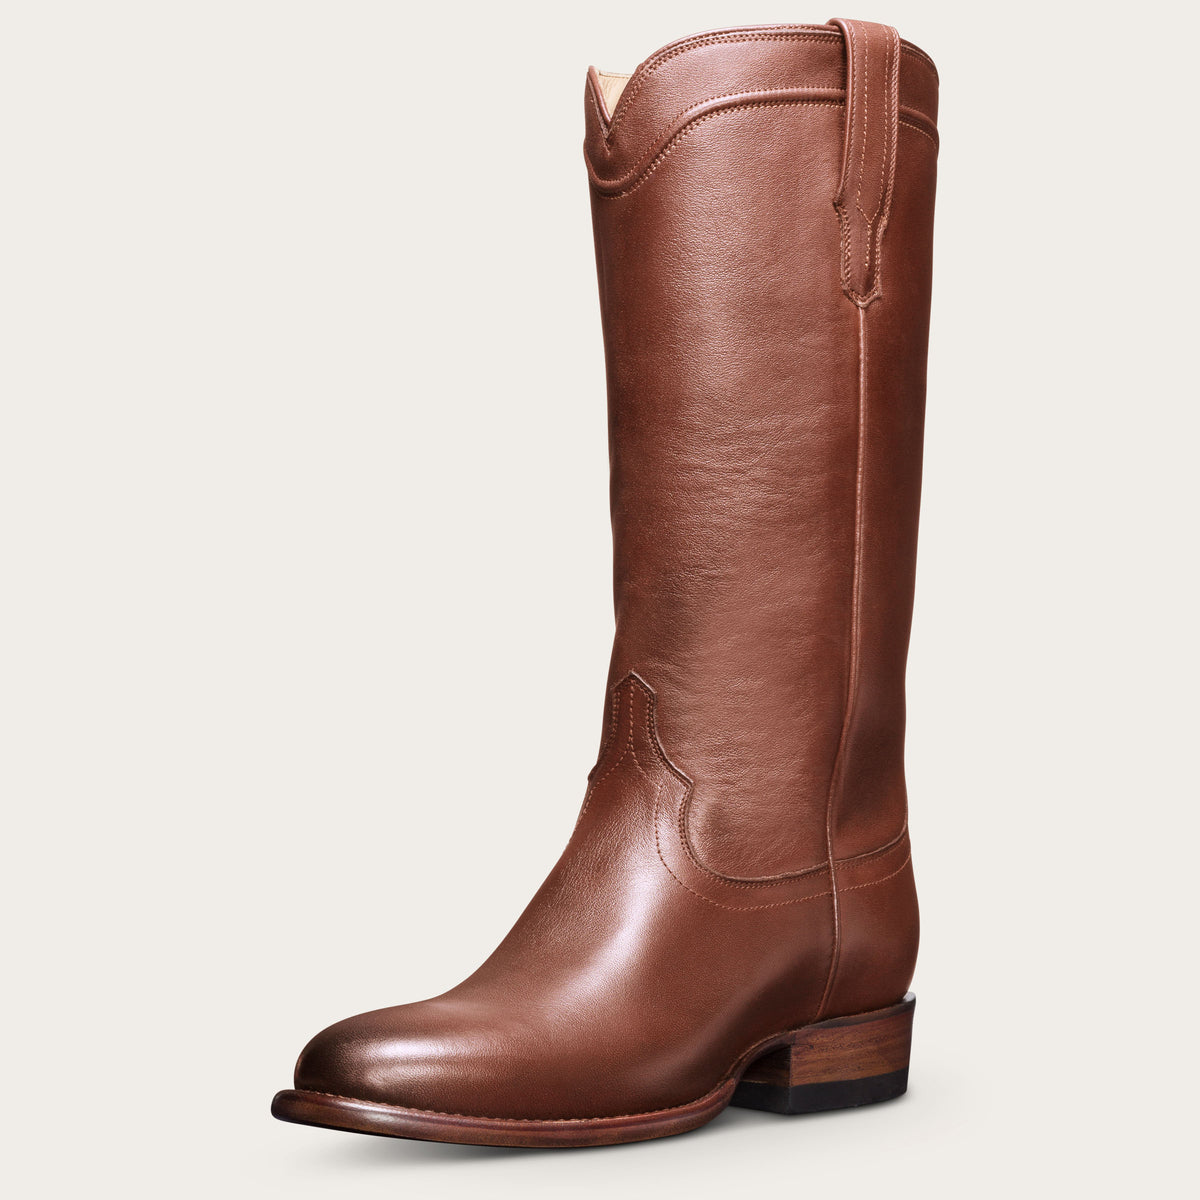 Women's Leather Riding Boots - Western 